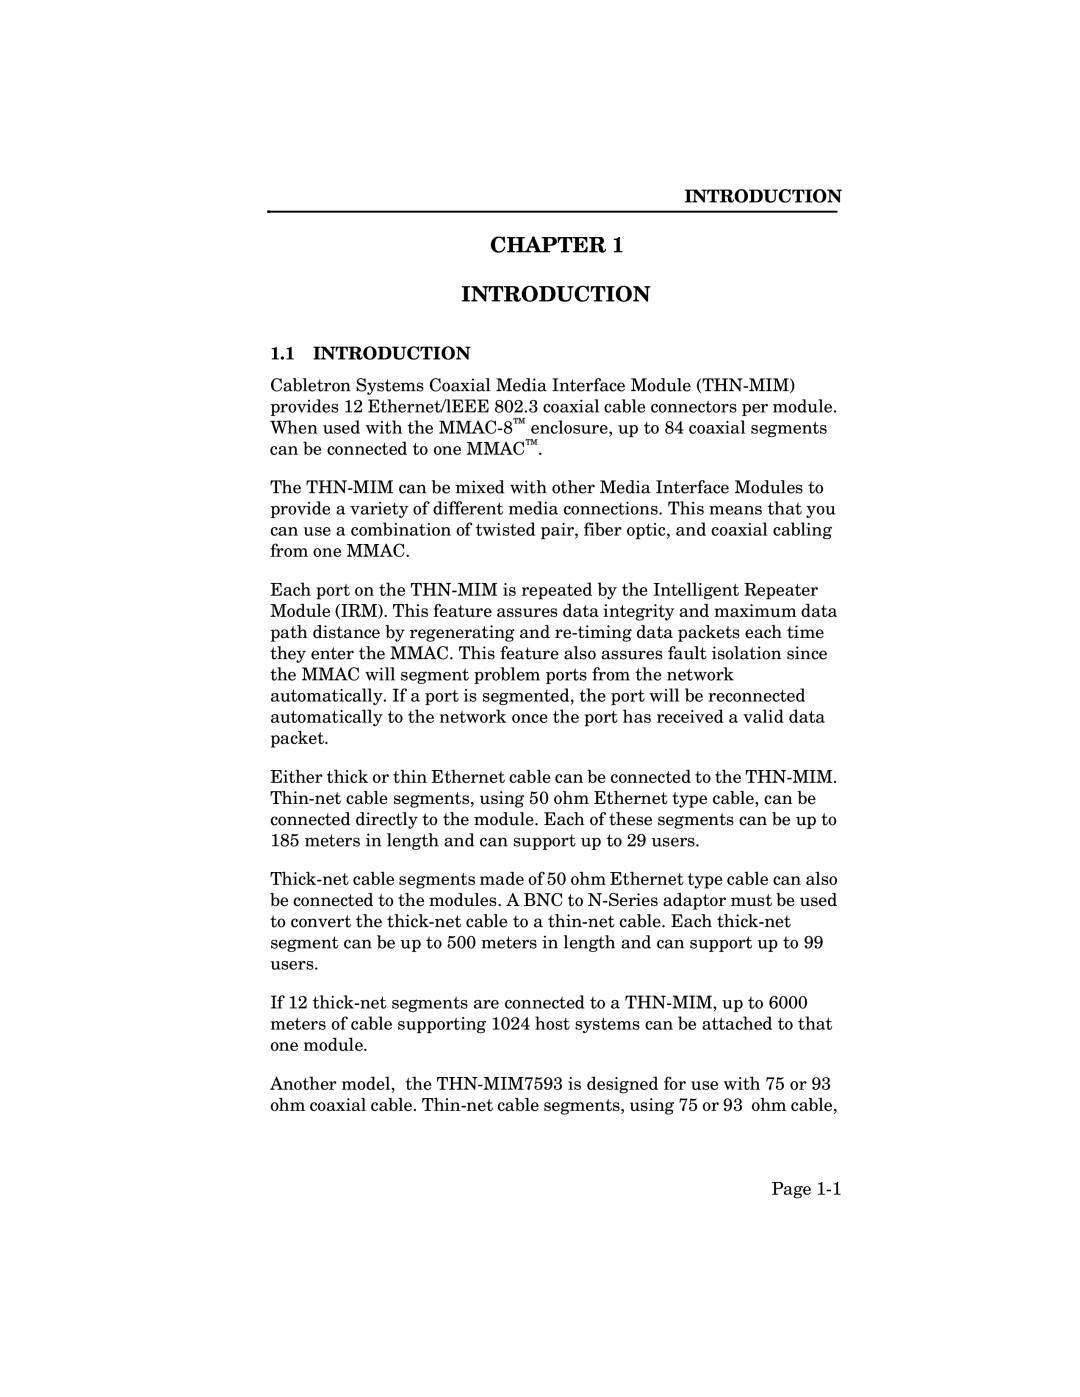 Cabletron Systems THN-MIM manual Chapter Introduction 